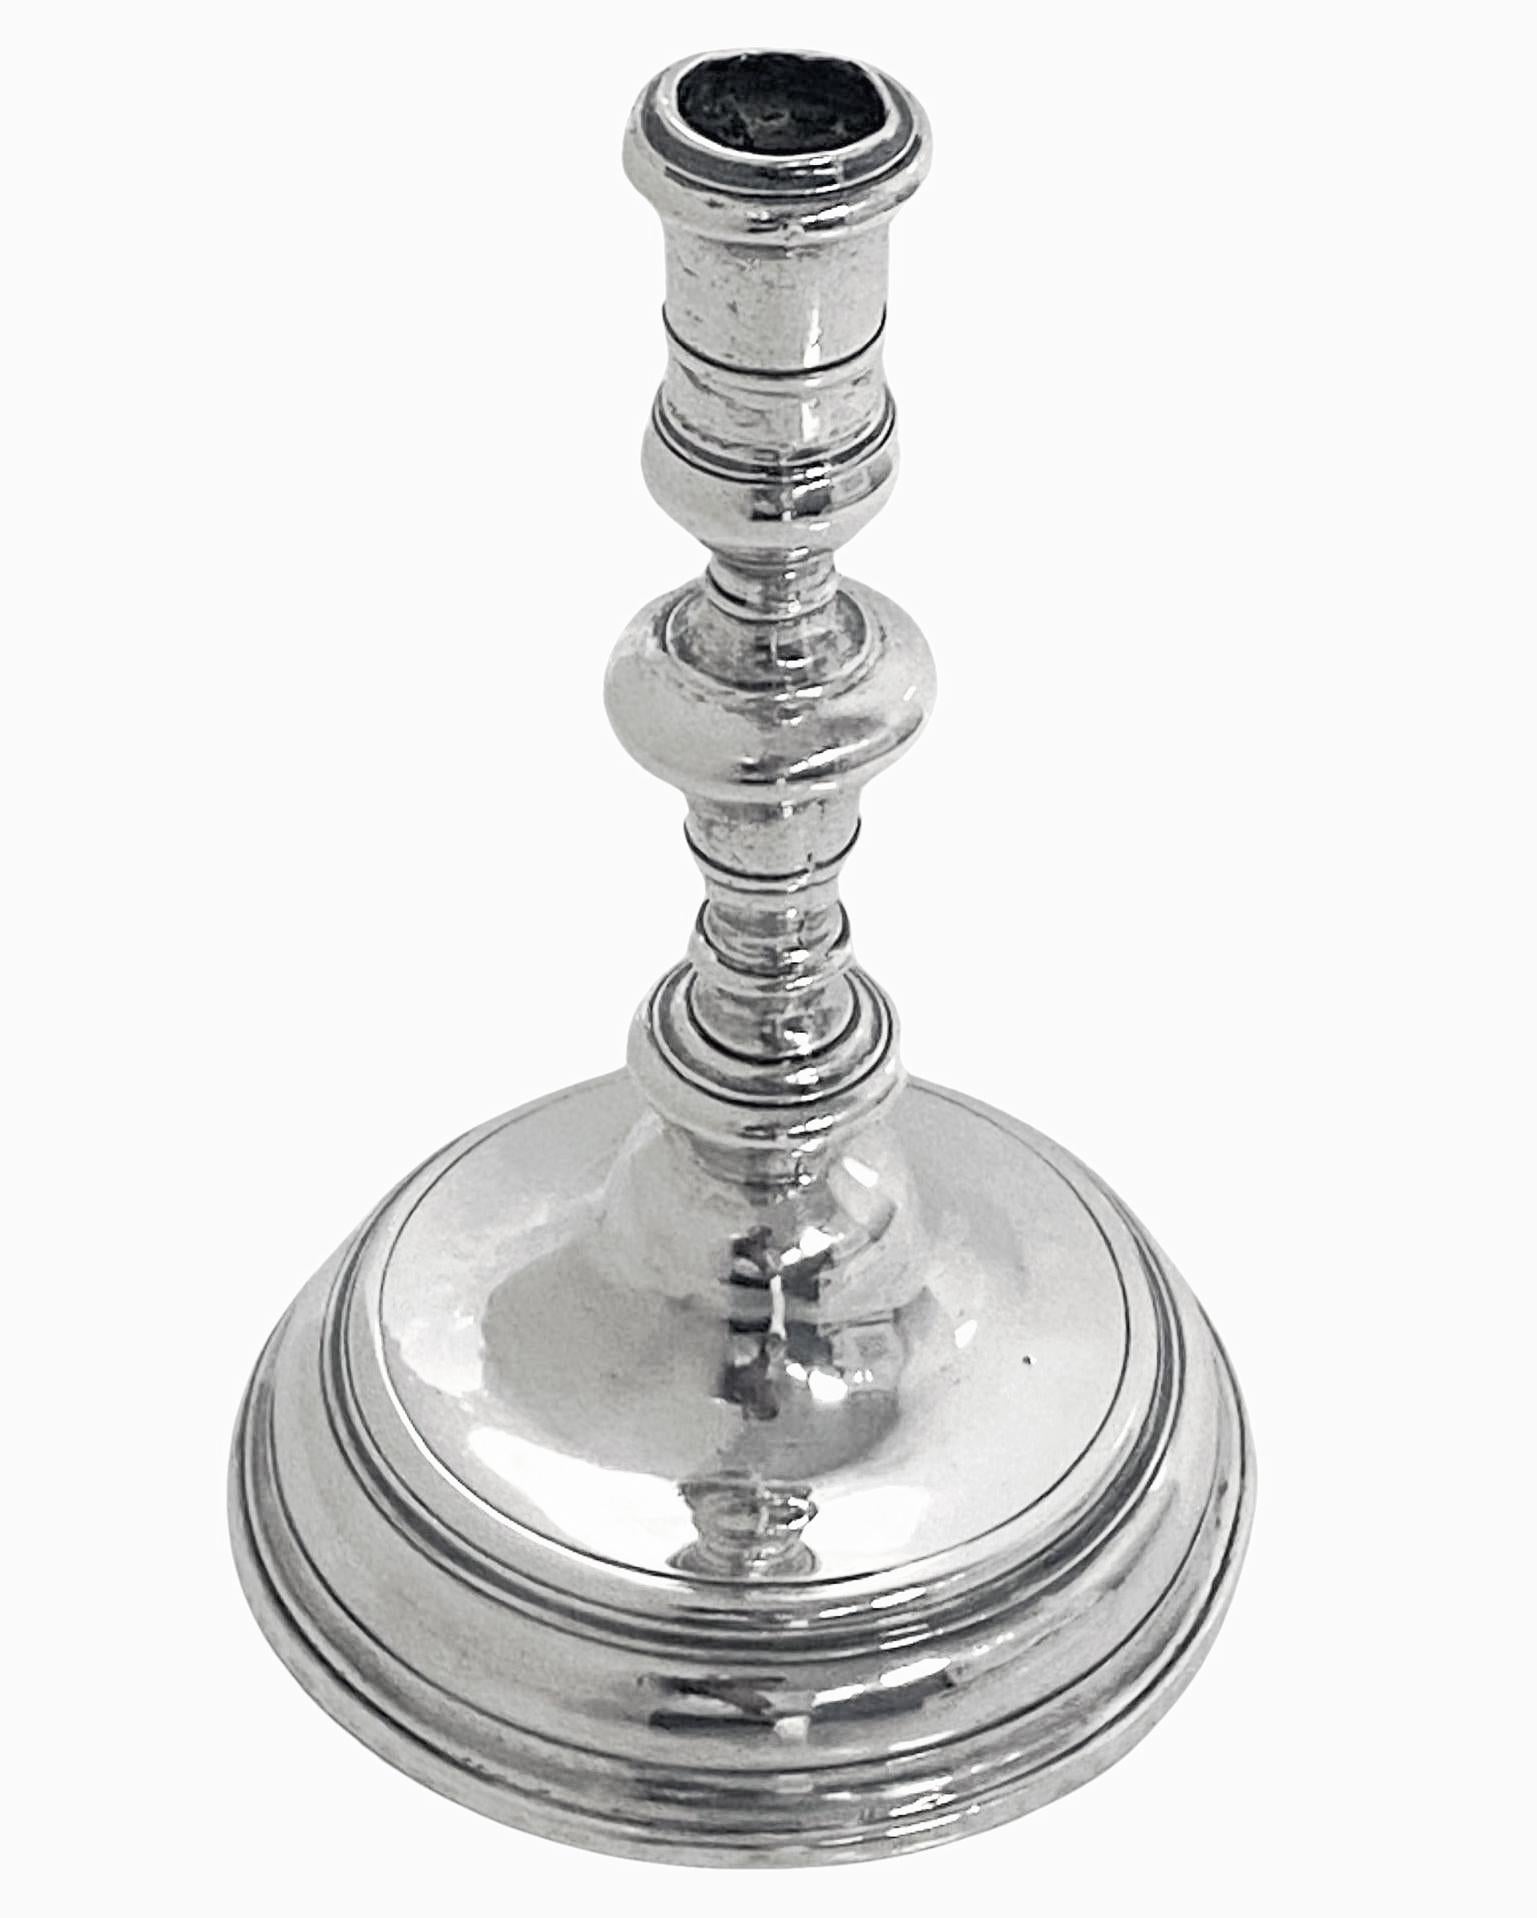 English Queen Anne silver taperstick London 1704 Richard Syngin (Syng). 